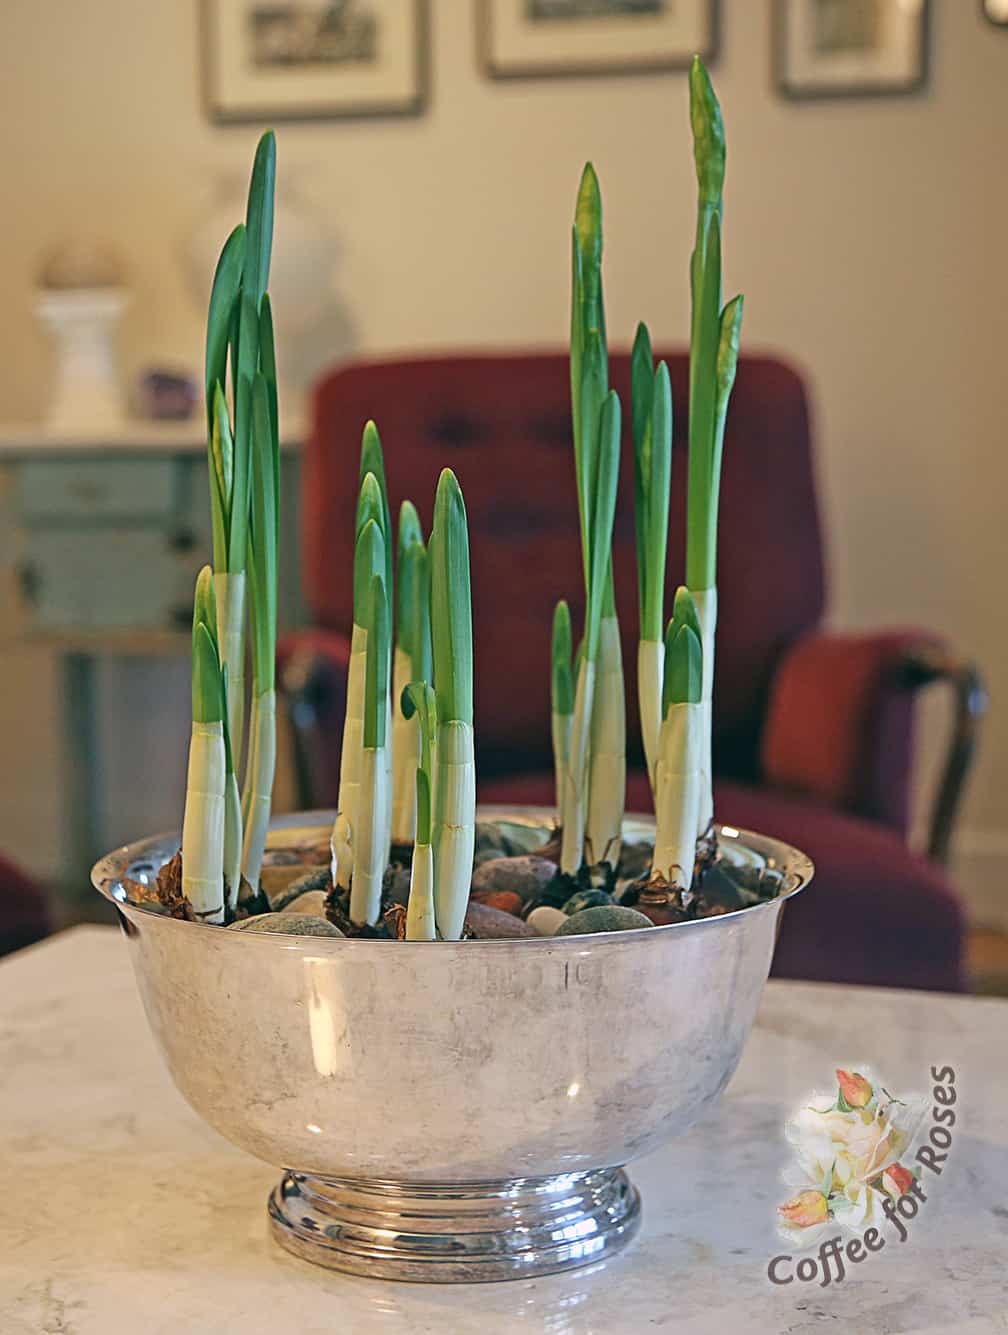 Once the narcissus are about five or six inches tall it's time to provide support. Here's how I did it...